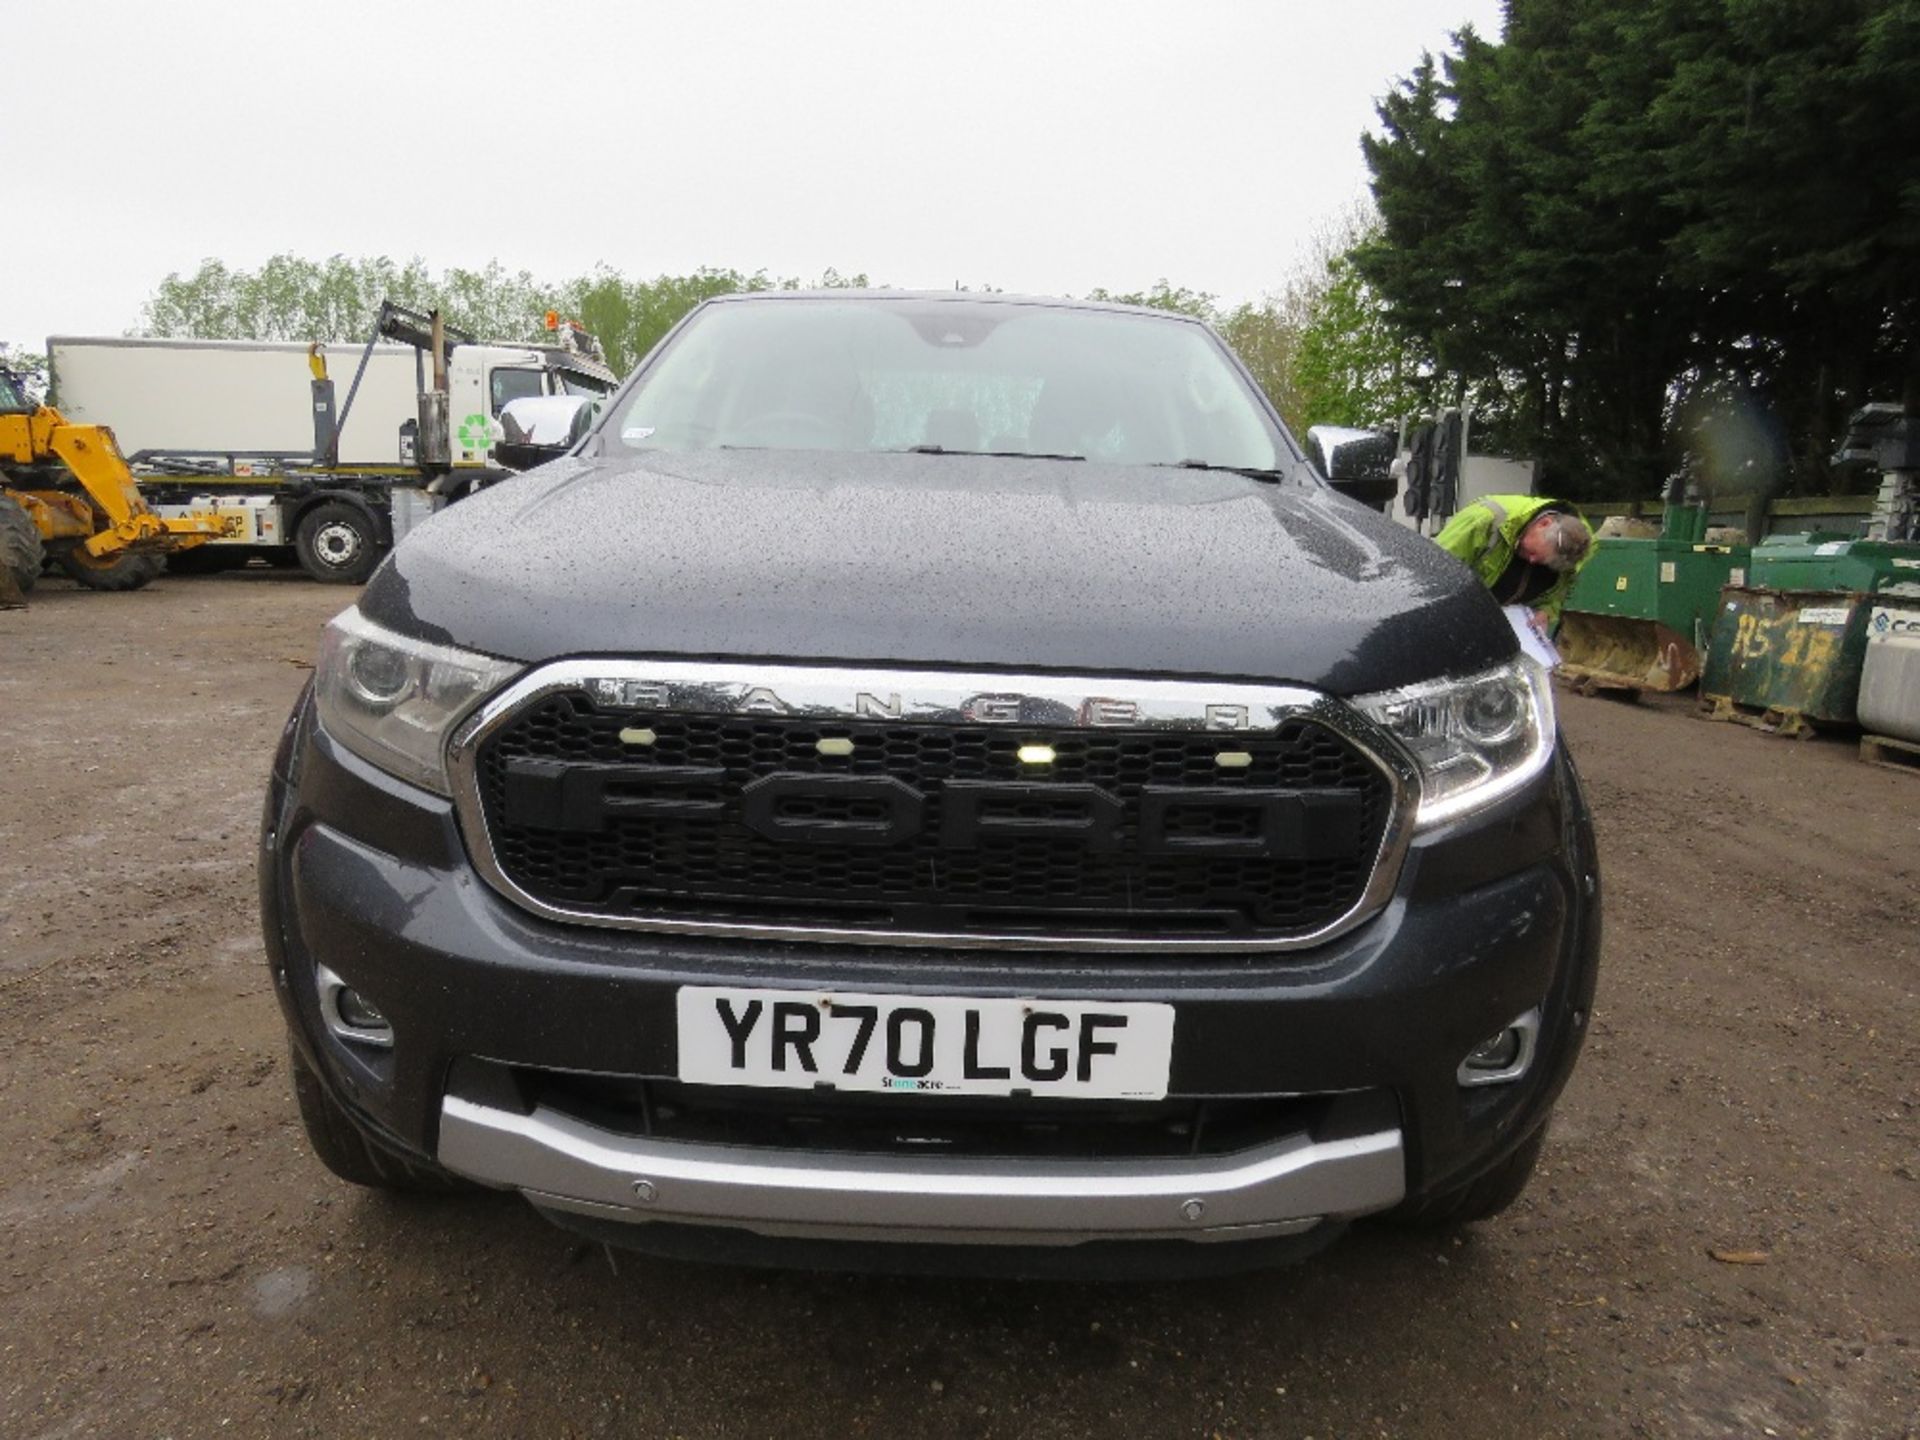 FORD RANGER LIMITED EDITION DOUBLE CAB PICKUP, AUTOMATIC, REG:YR70 LGF. 110,287 REC MILES. 2 LITRE - Image 2 of 15